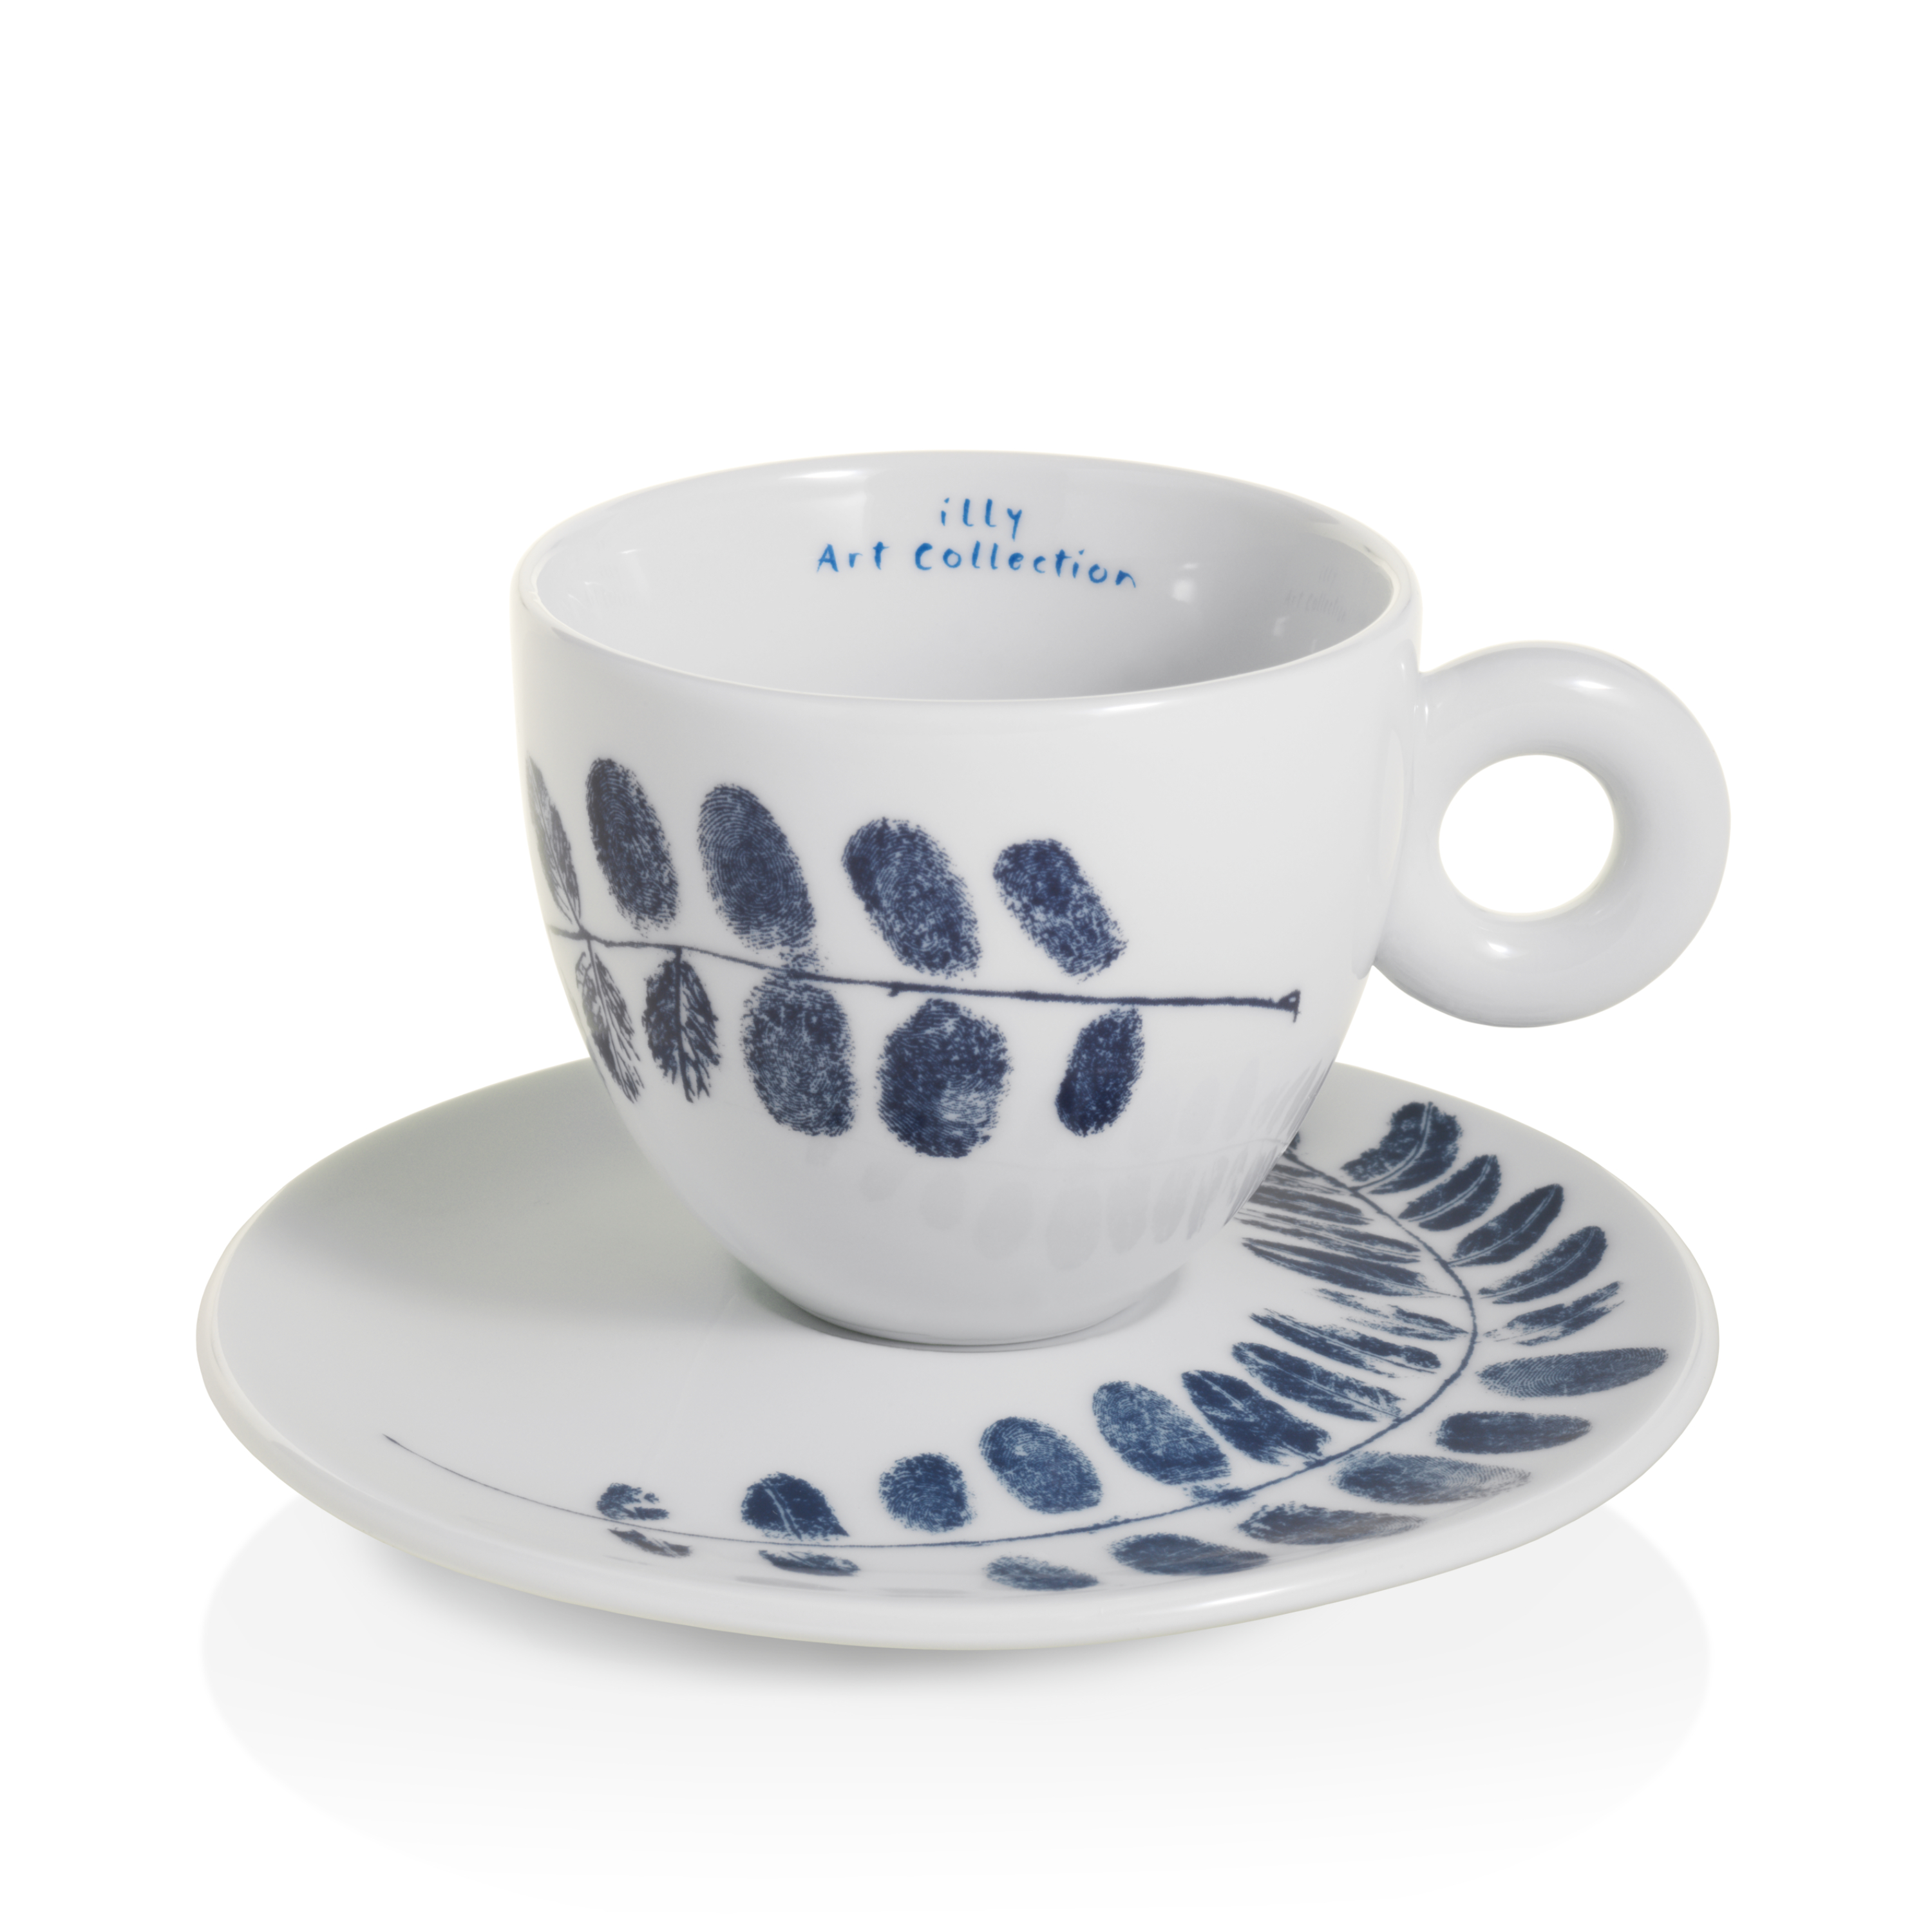 illy Art Collection ΒΙΕΝΝΑLE 2022 Σετ Δώρου 6 Cappuccino Cups, Φλιτζάνια , 02-02-6087